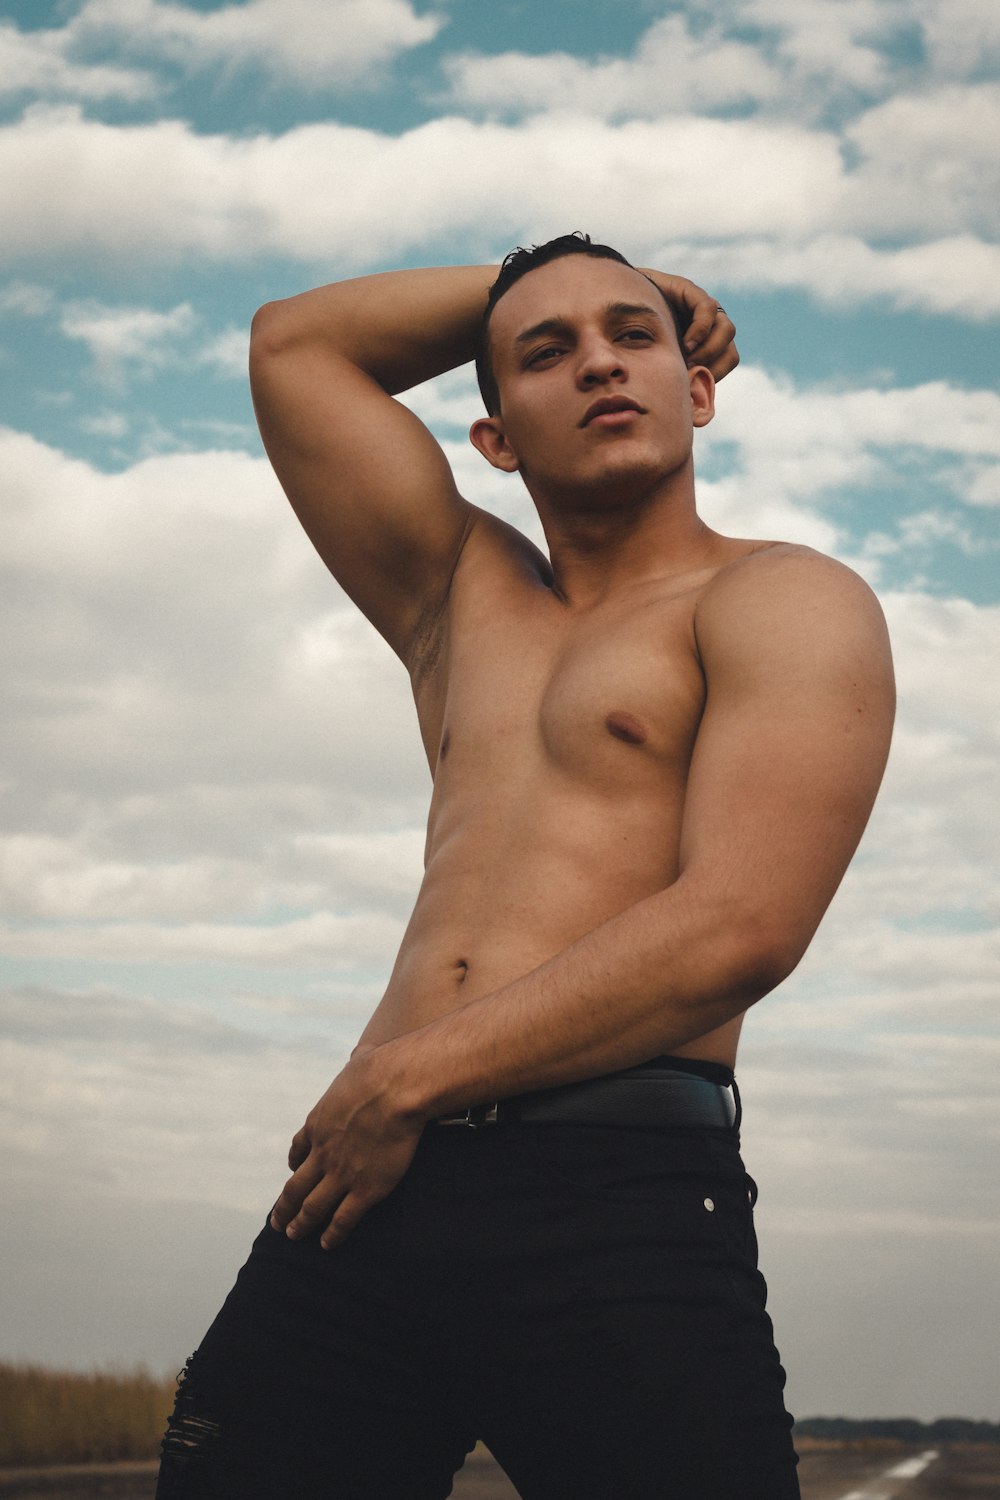 a shirtless man standing in front of a cloudy sky